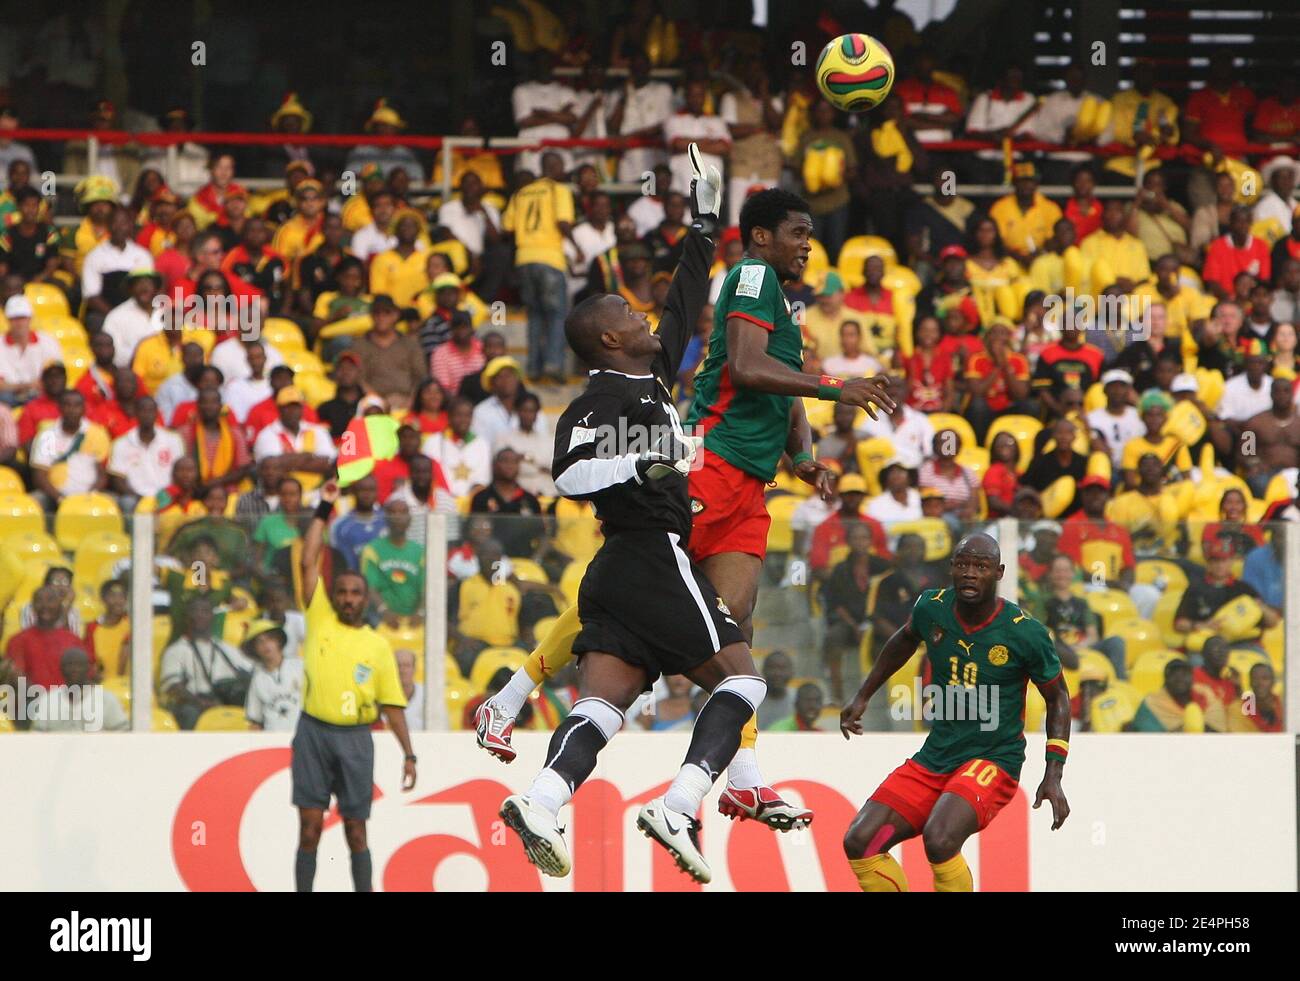 Ghana's goalkeeper Sammy Adjei saves the Cameroon's Samuel Eto'o heads during the African Cup of Nations Semi Final soccer match, Ghana vs Cameroon in Accra, Ghana on February 7, 2008. Cameroon are only one step away from a record-equalling fifth African Nations Cup title after wrecking Ghana's party with a 1-0 semi-final win over the hosts. Photo by Steeve McMay/Cameleon/ABACAPRESS.COM Stock Photo